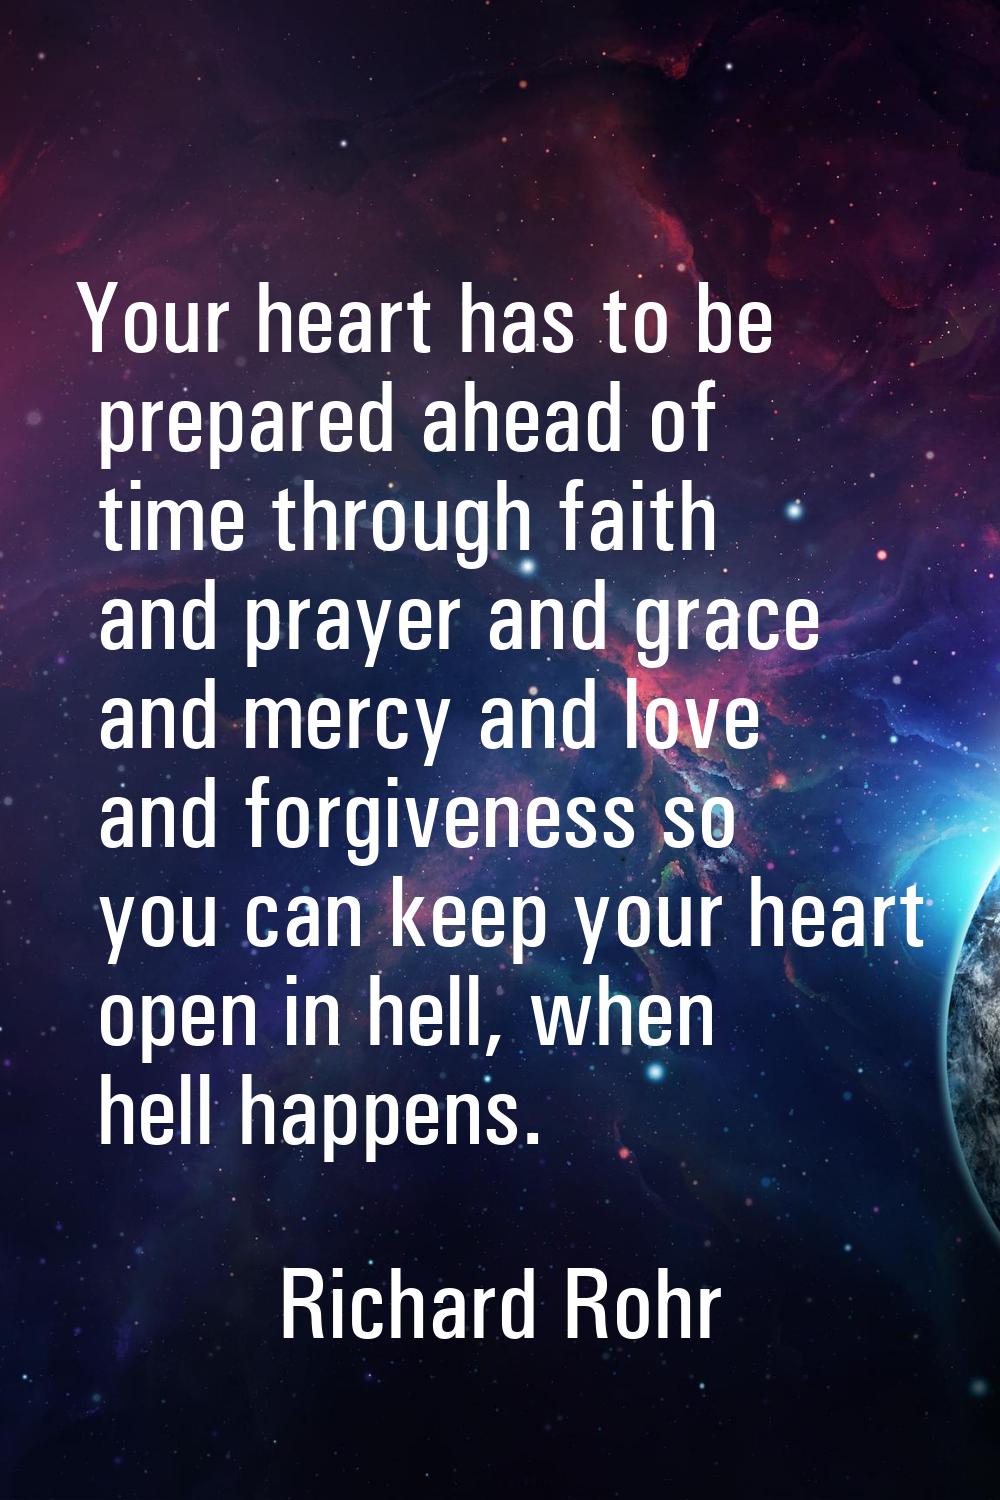 Your heart has to be prepared ahead of time through faith and prayer and grace and mercy and love a